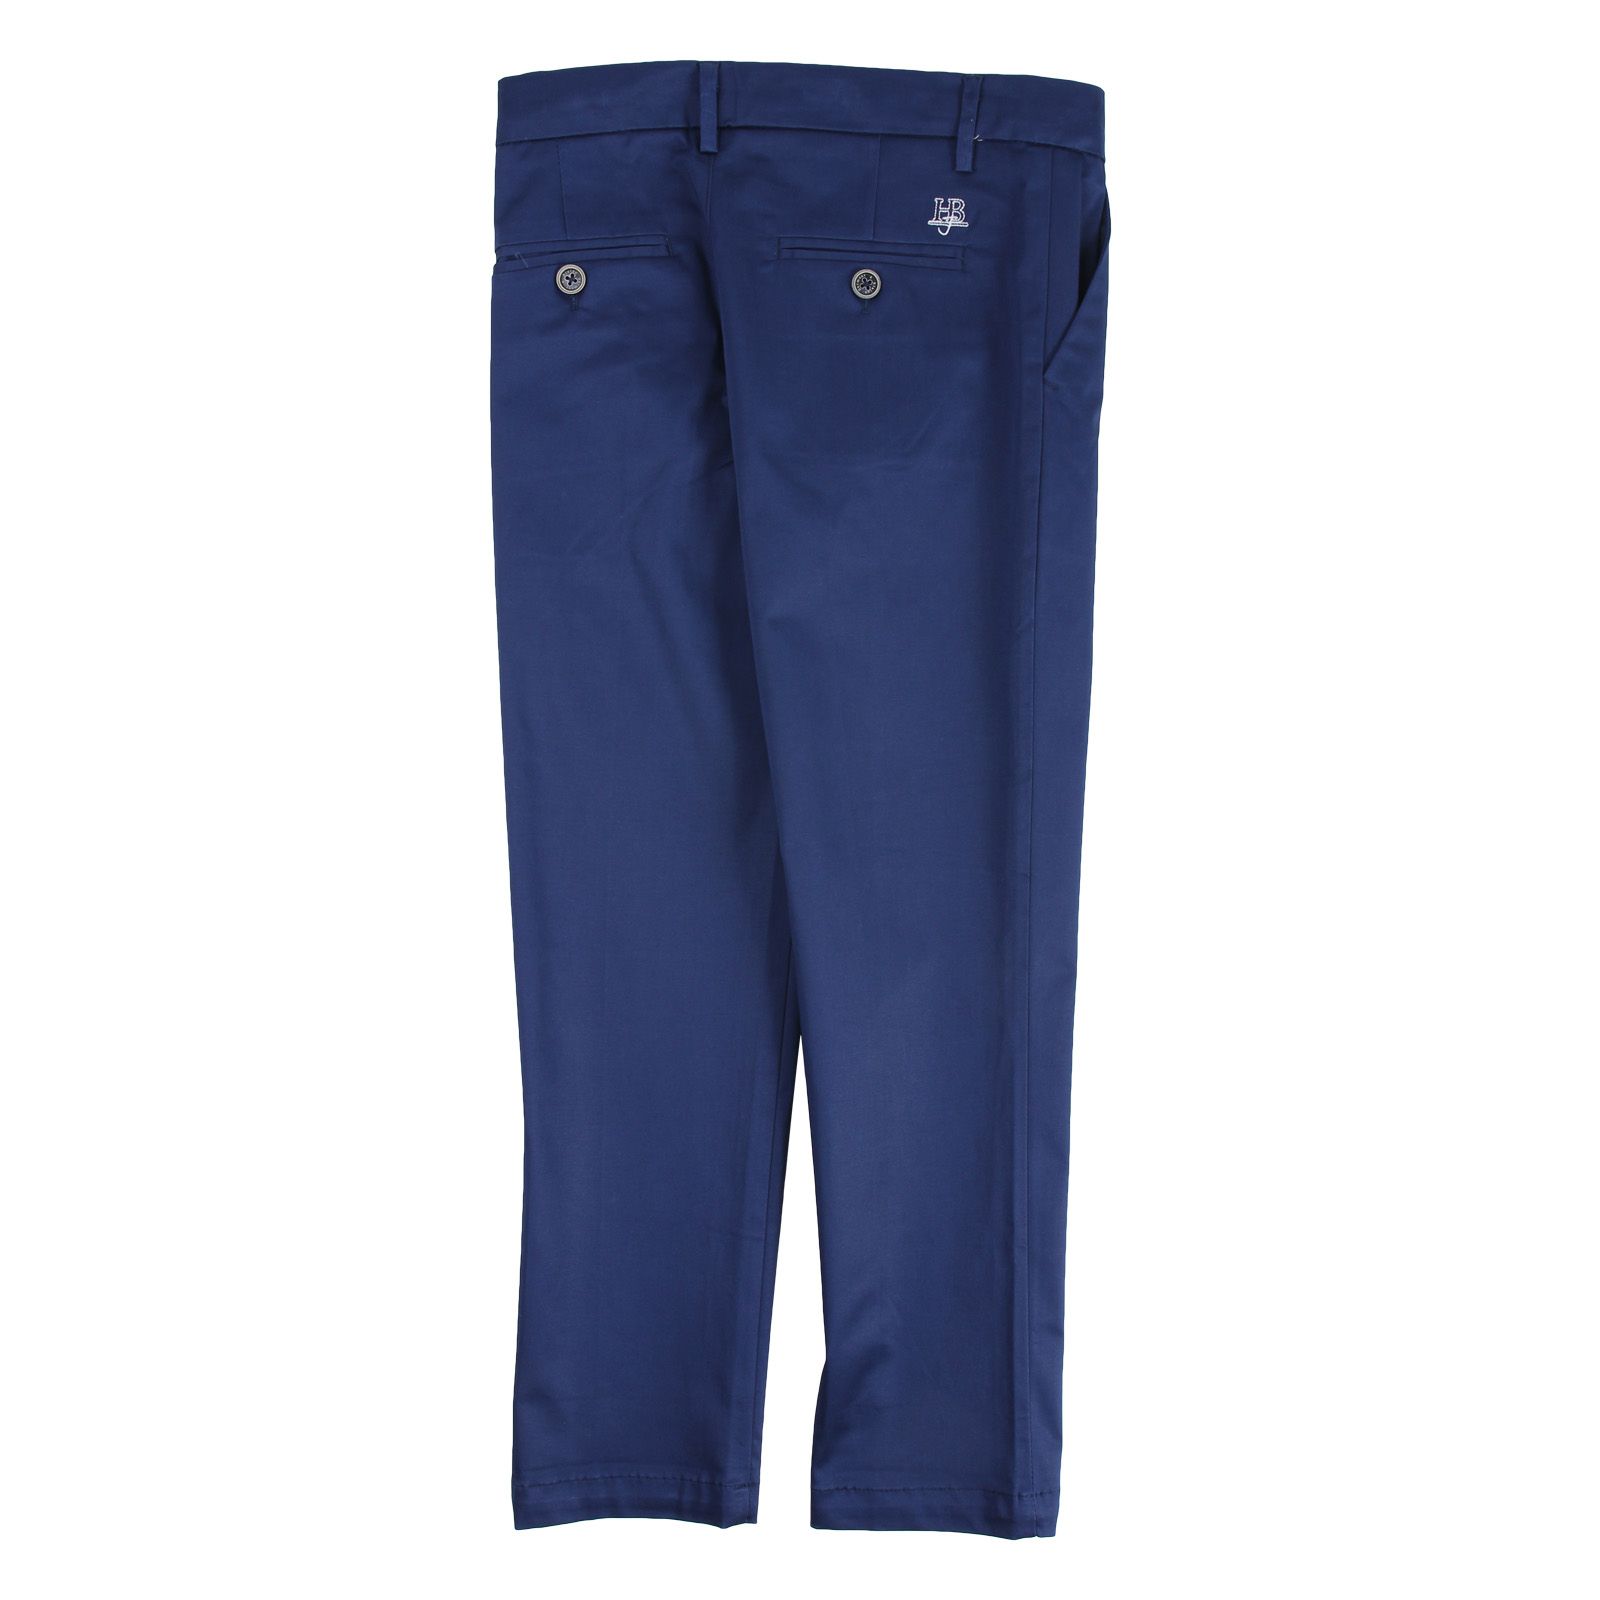 Harmont & Blaine blue prussian trousers -Details basic trousers, completely blue, 4 pockets, back with visible logo, central closure -Washing max 30 °